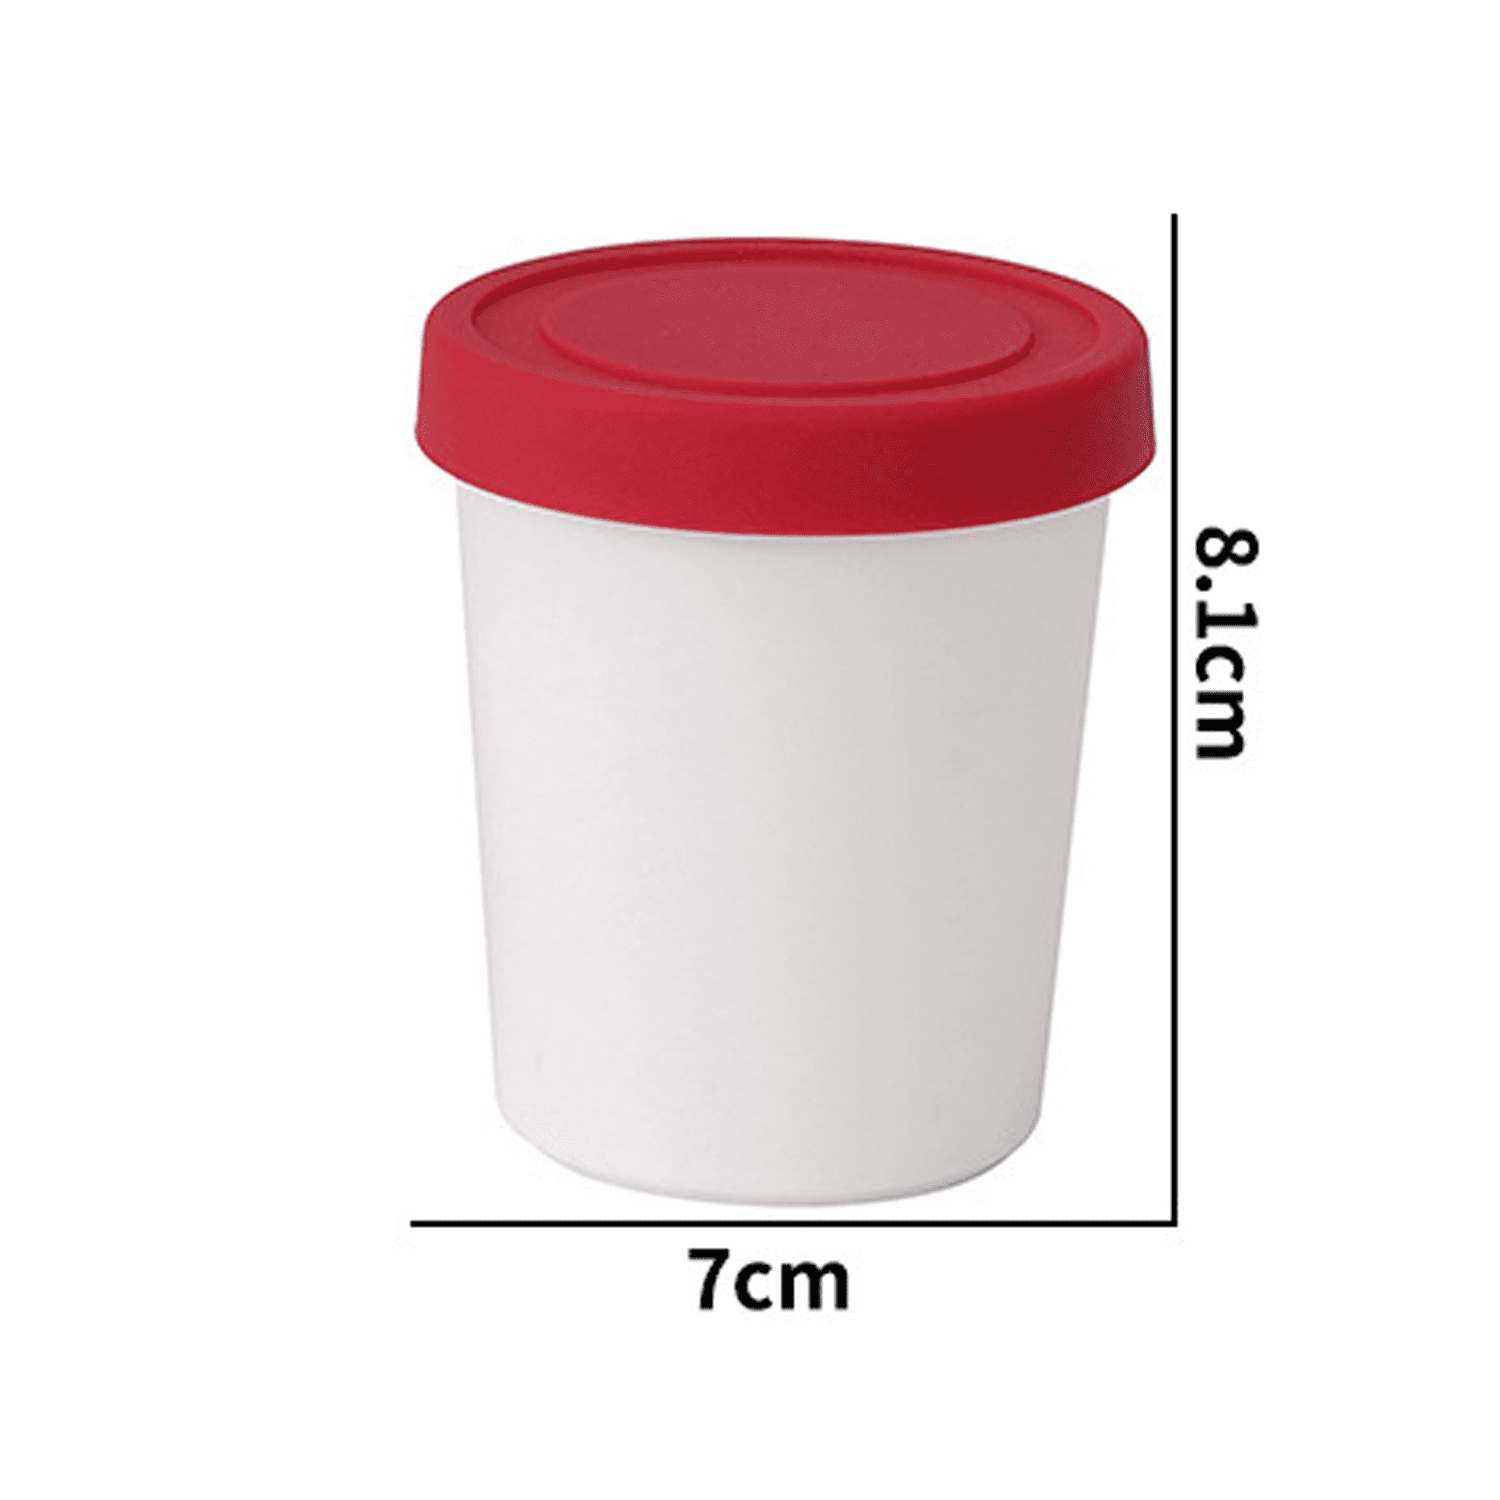 FancyClancy's Long Scoop Insulated Ice Cream Container With Scoop - Freezer  Storage Tub with Non-Slip Base For Homemade Ice-Cream, Gelato or Sorbet 